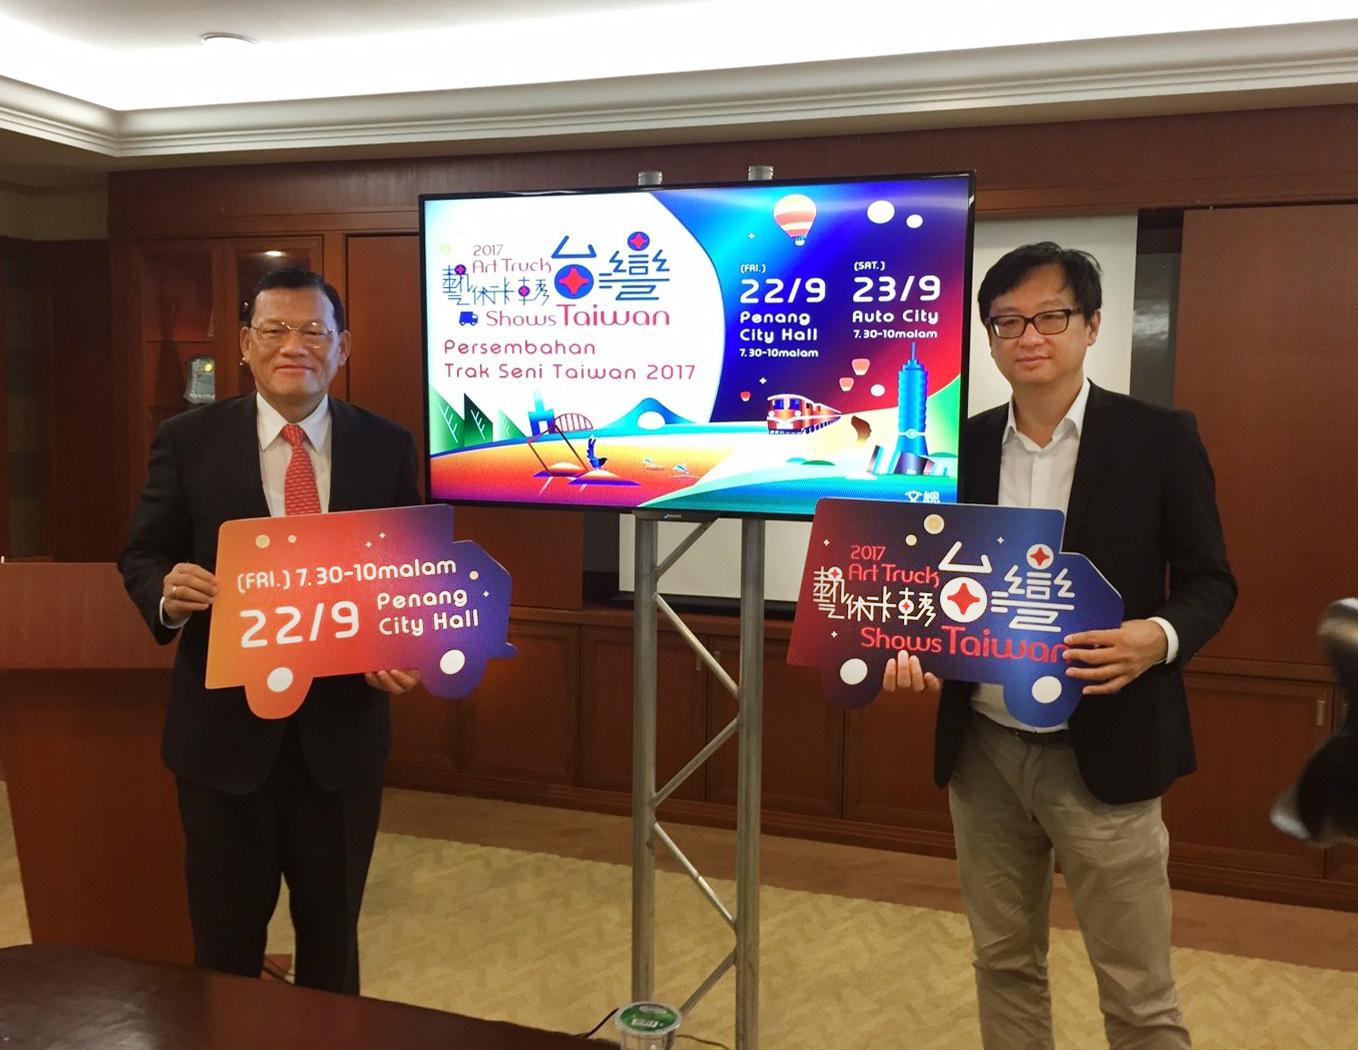 Representative of TECO, James Chang Chi-ping (left) and the deputy secretary general of GACC, Chang Thieh Chih (right) take photo together.